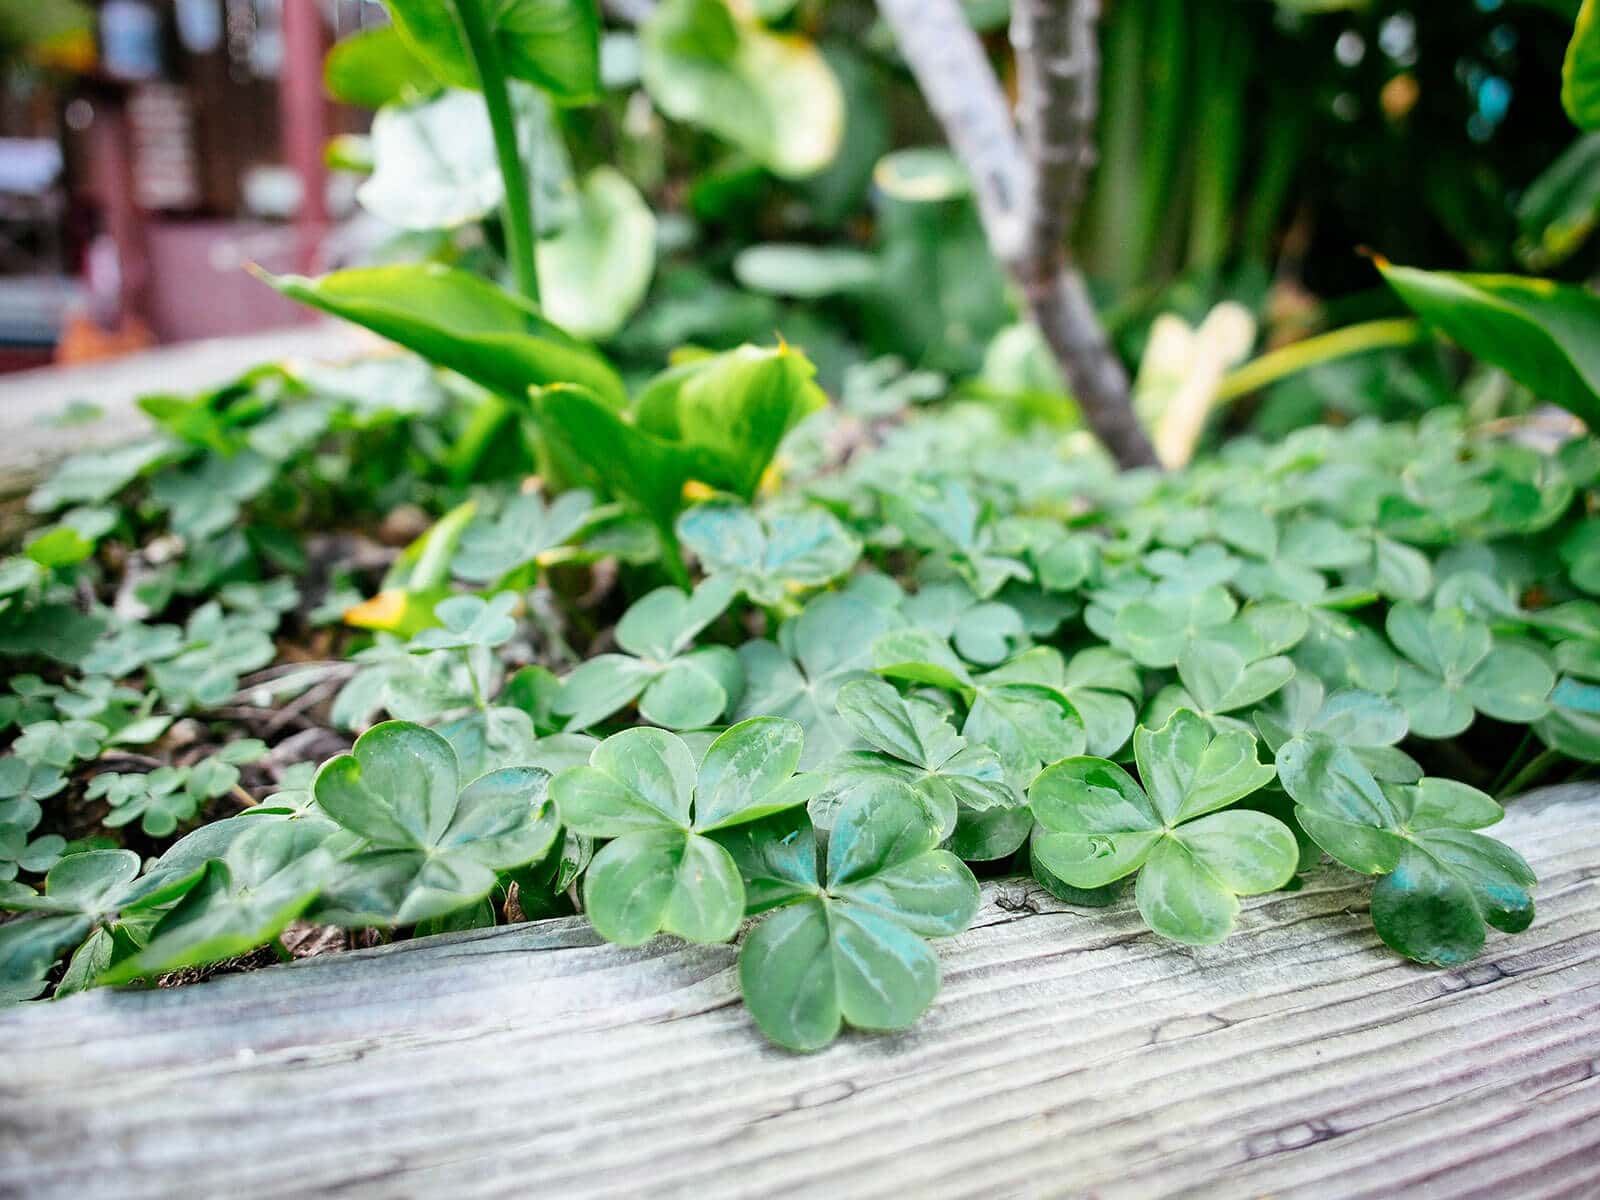 Wood sorrel (oxalis) makes an excellent edible ground cover for shady vegetable gardens